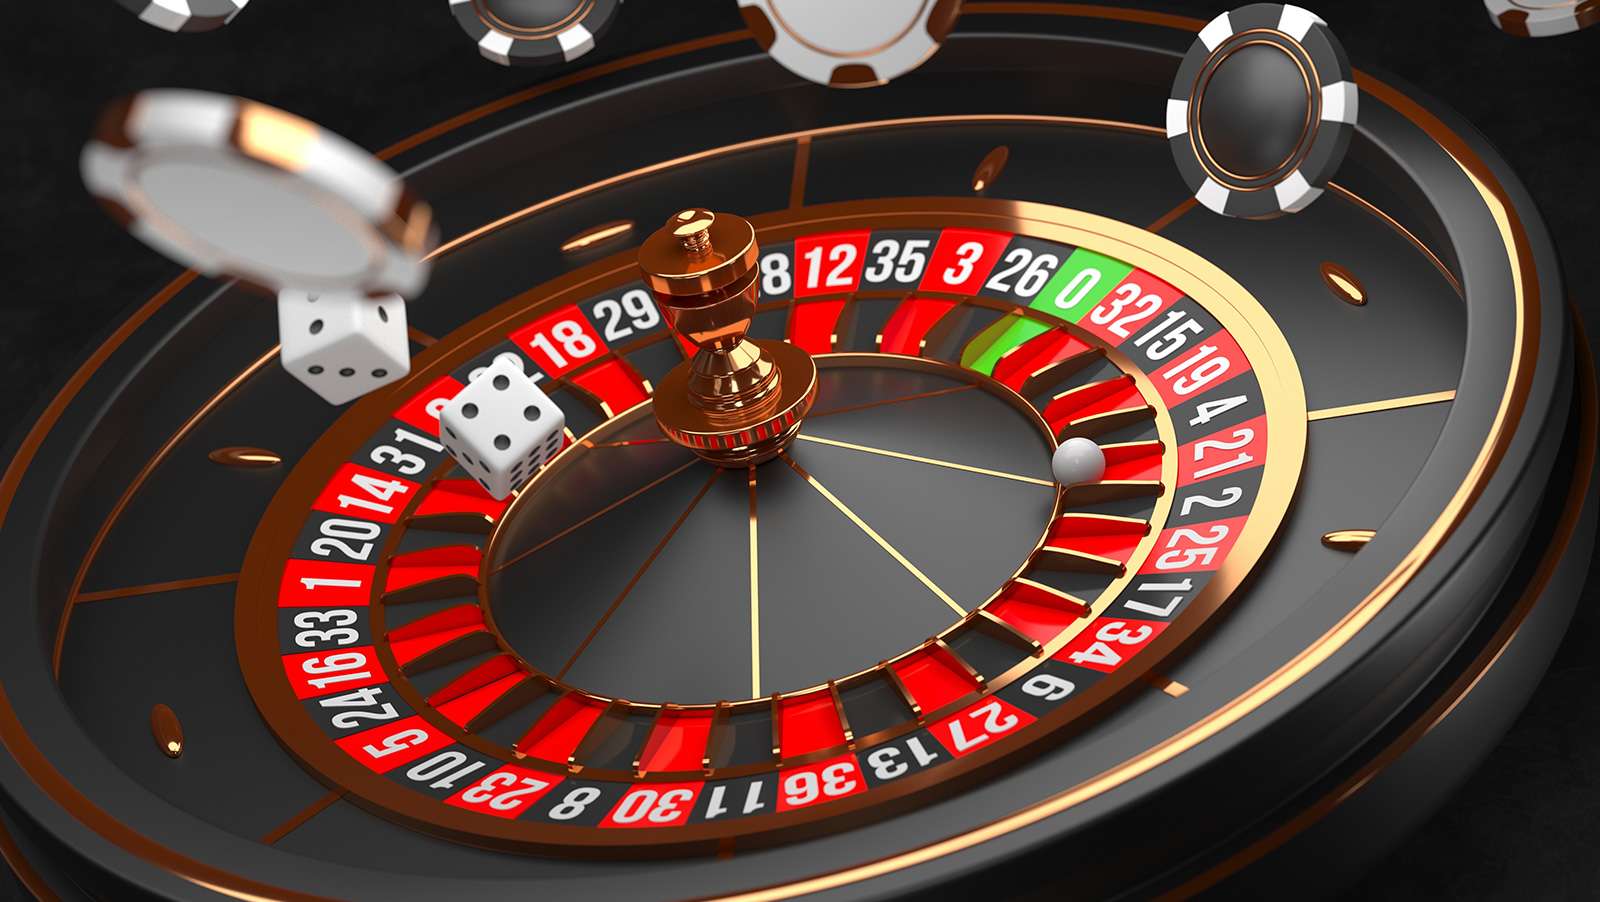 How Does an Affiliate Network Work in an Online Casino?